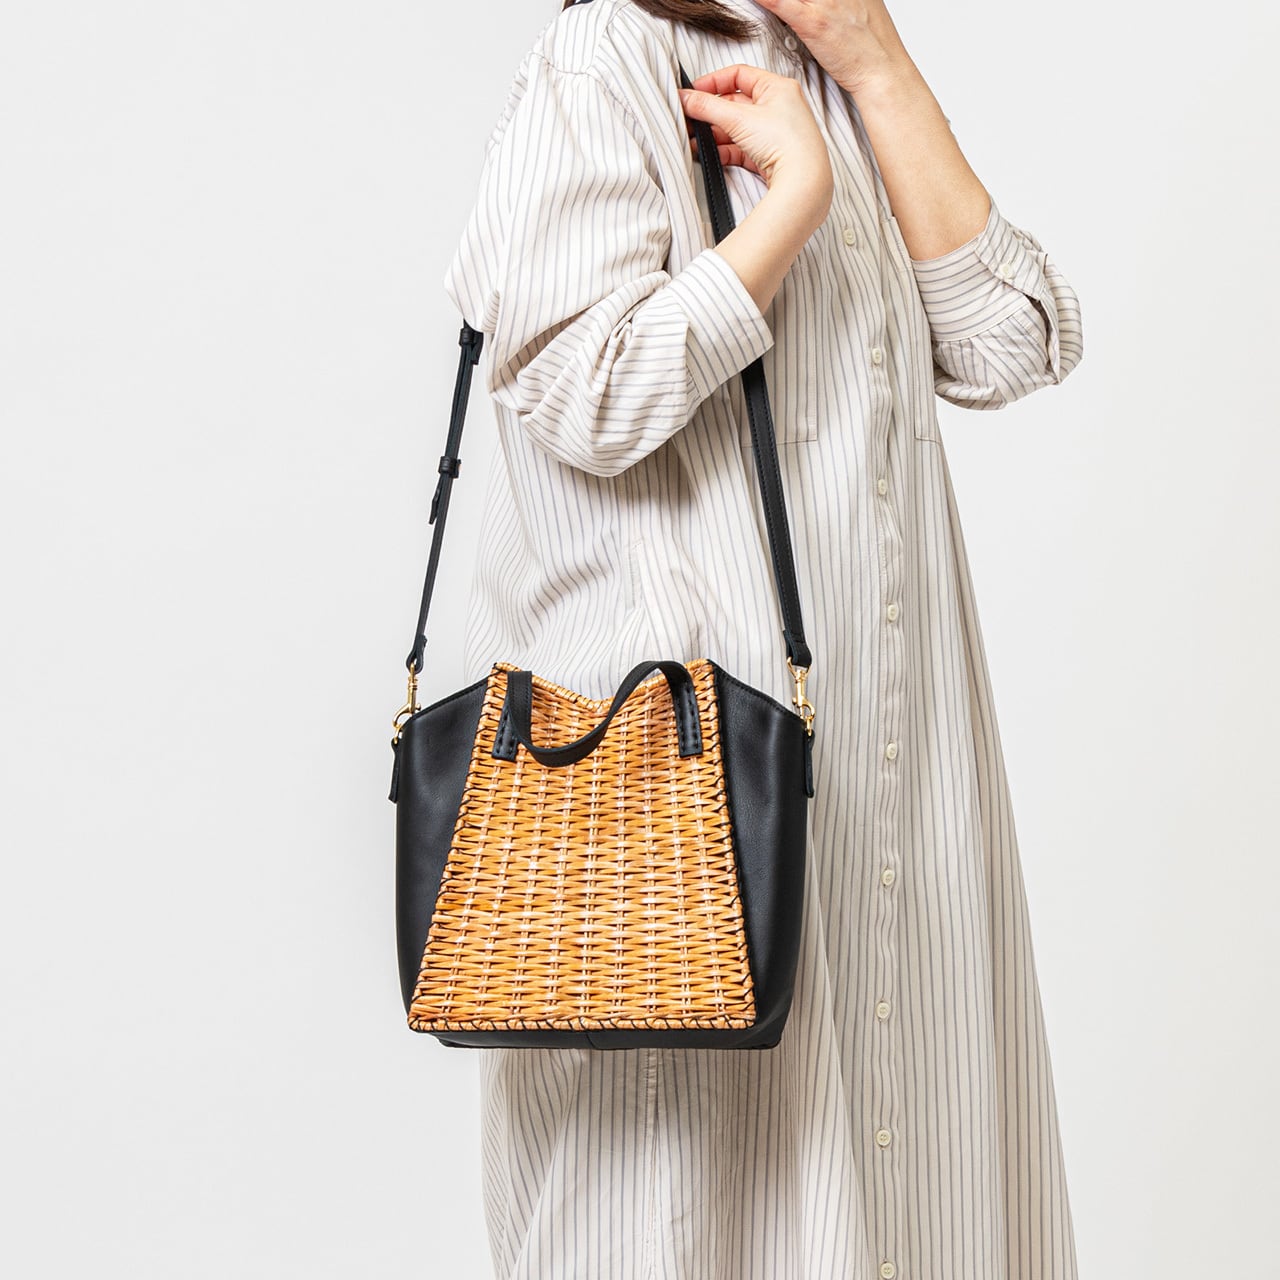 [Japanese brand] "ikot" classic series-"THE" Rattan Bag with magnetic buckle 